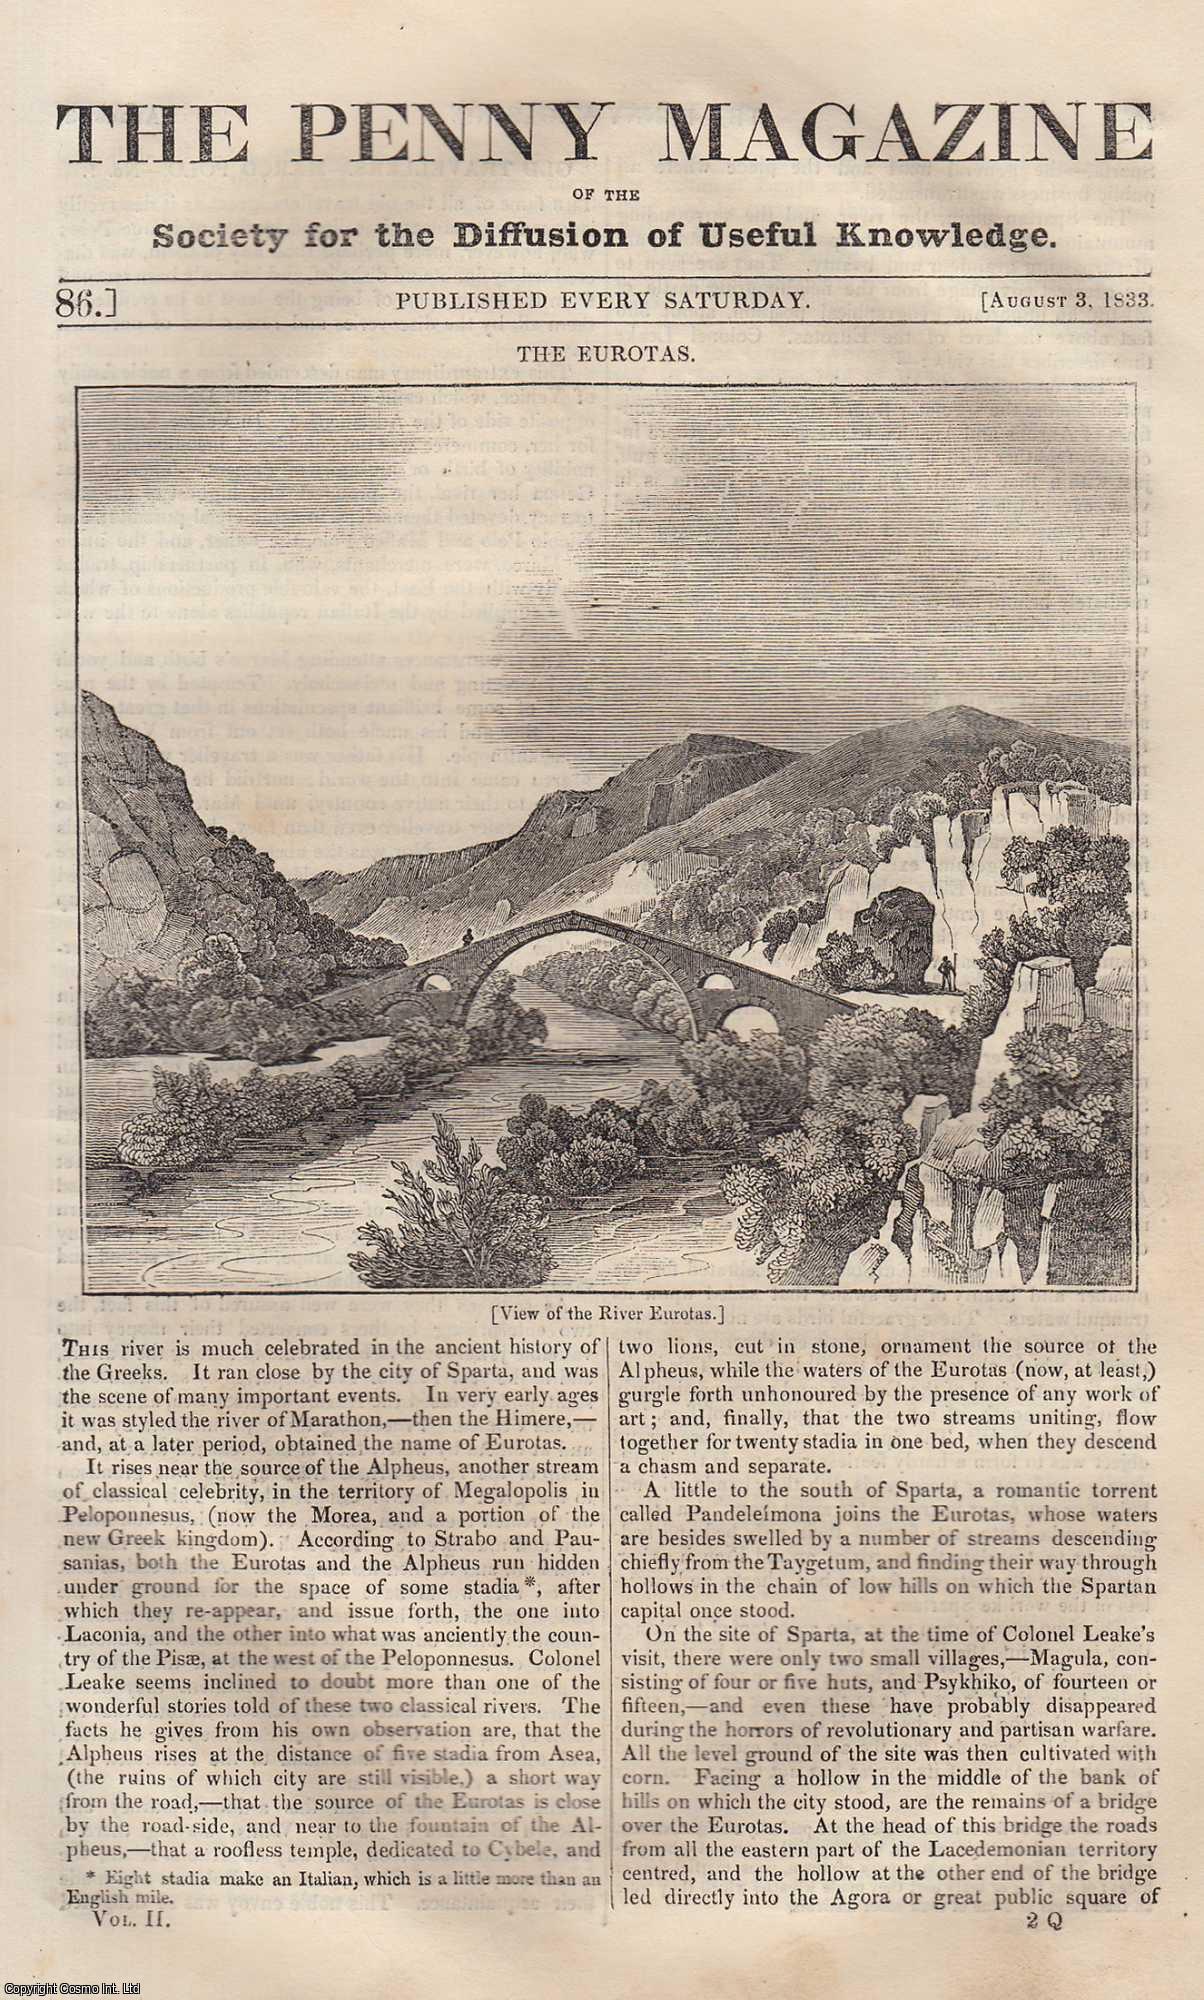 Penny Magazine - The River of Eurotas; The Grain Worms; Eruption of Mount Aetna in 1832; The City of Carlisle, etc. Issue No. 86, August 3rd, 1833. A complete original weekly issue of the Penny Magazine, 1833.